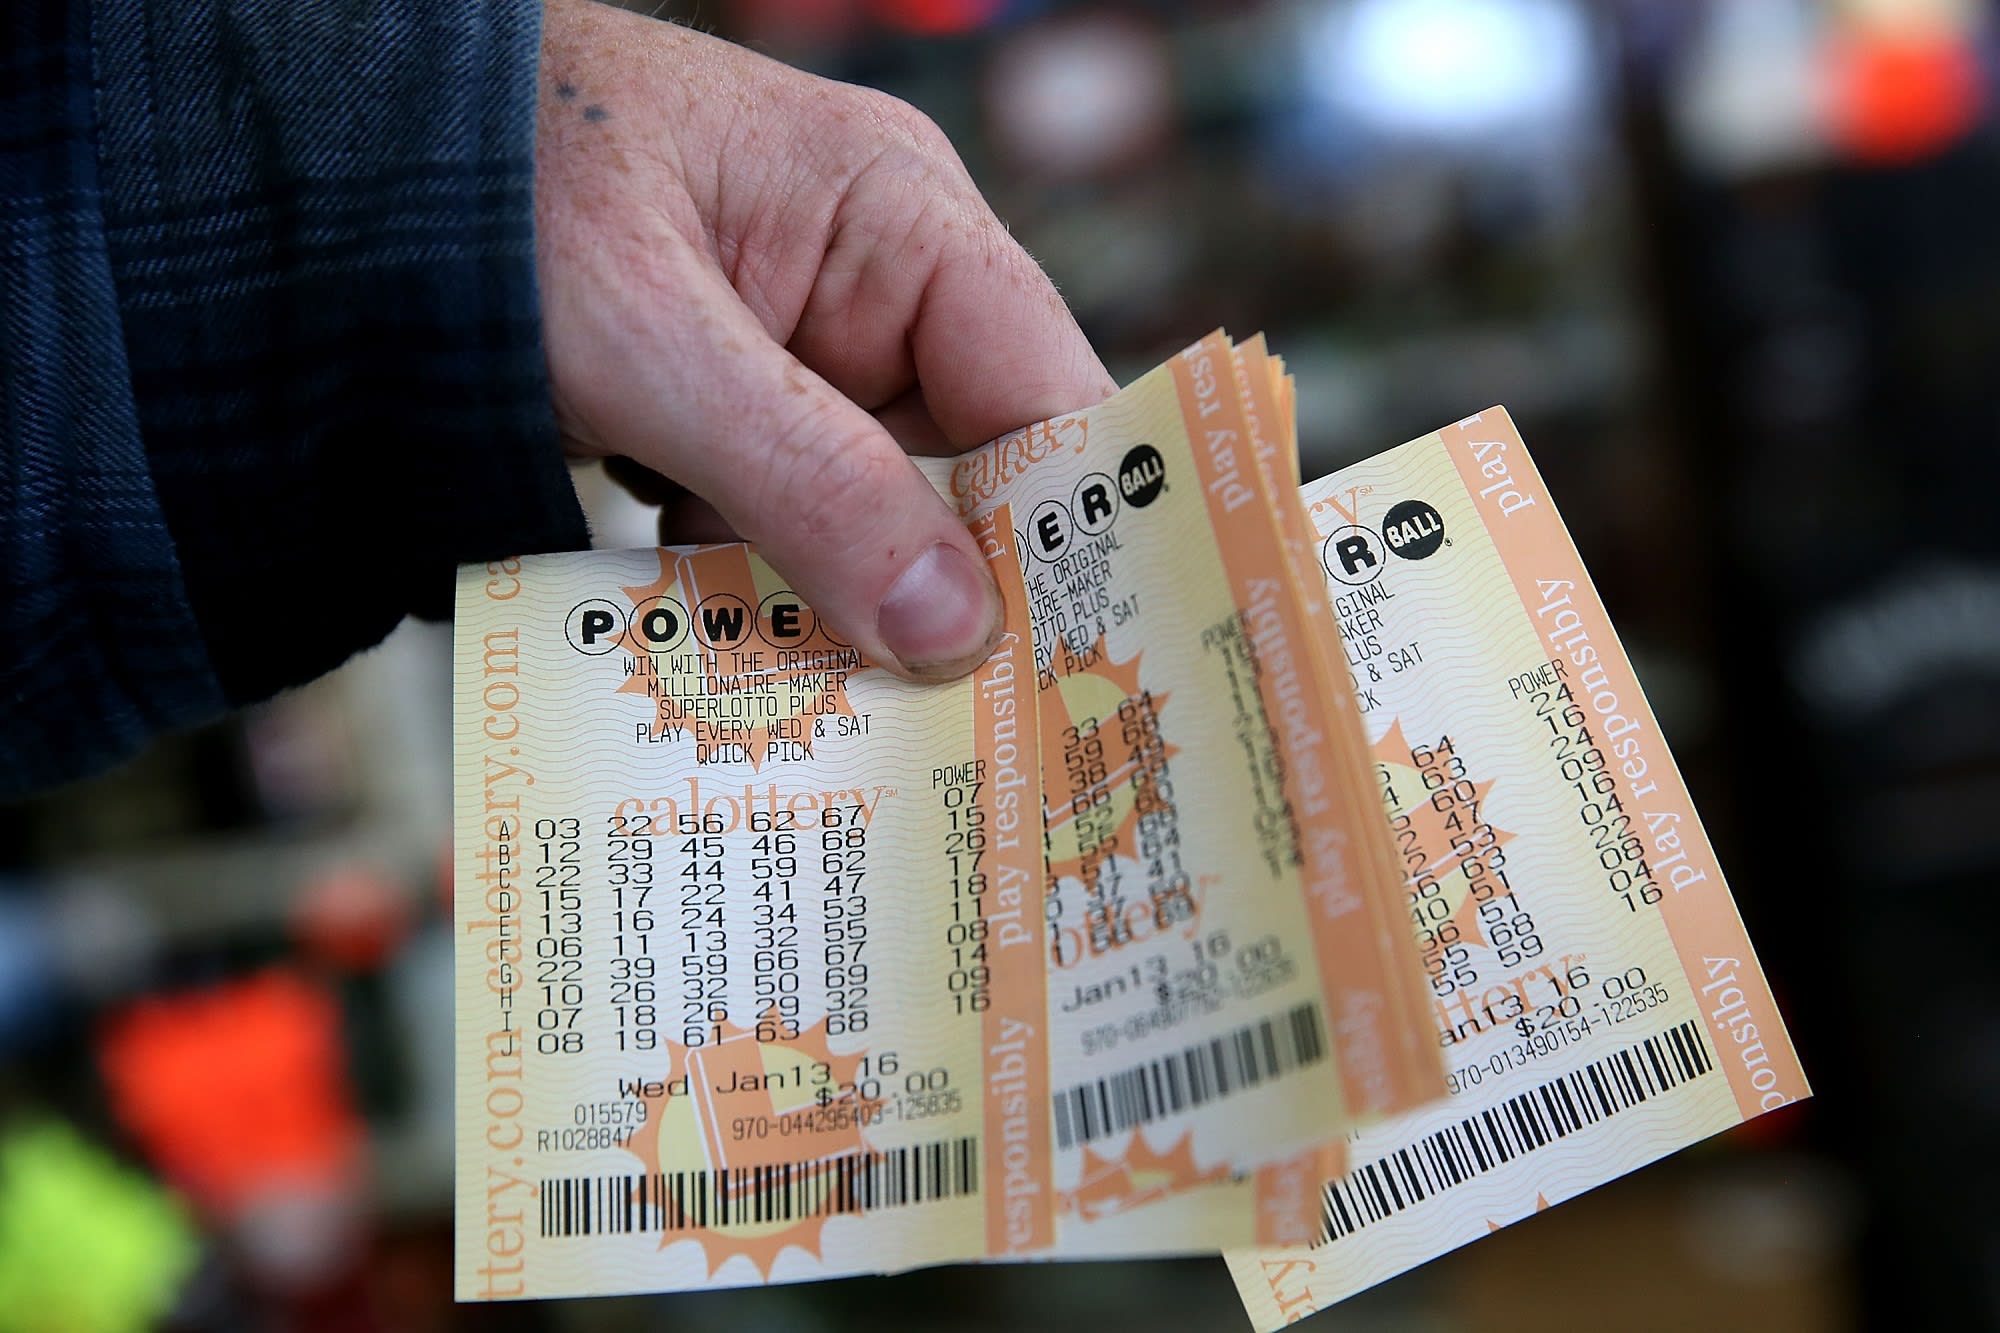 This is how one can defend your windfall in the event you hit $277 million Powerball